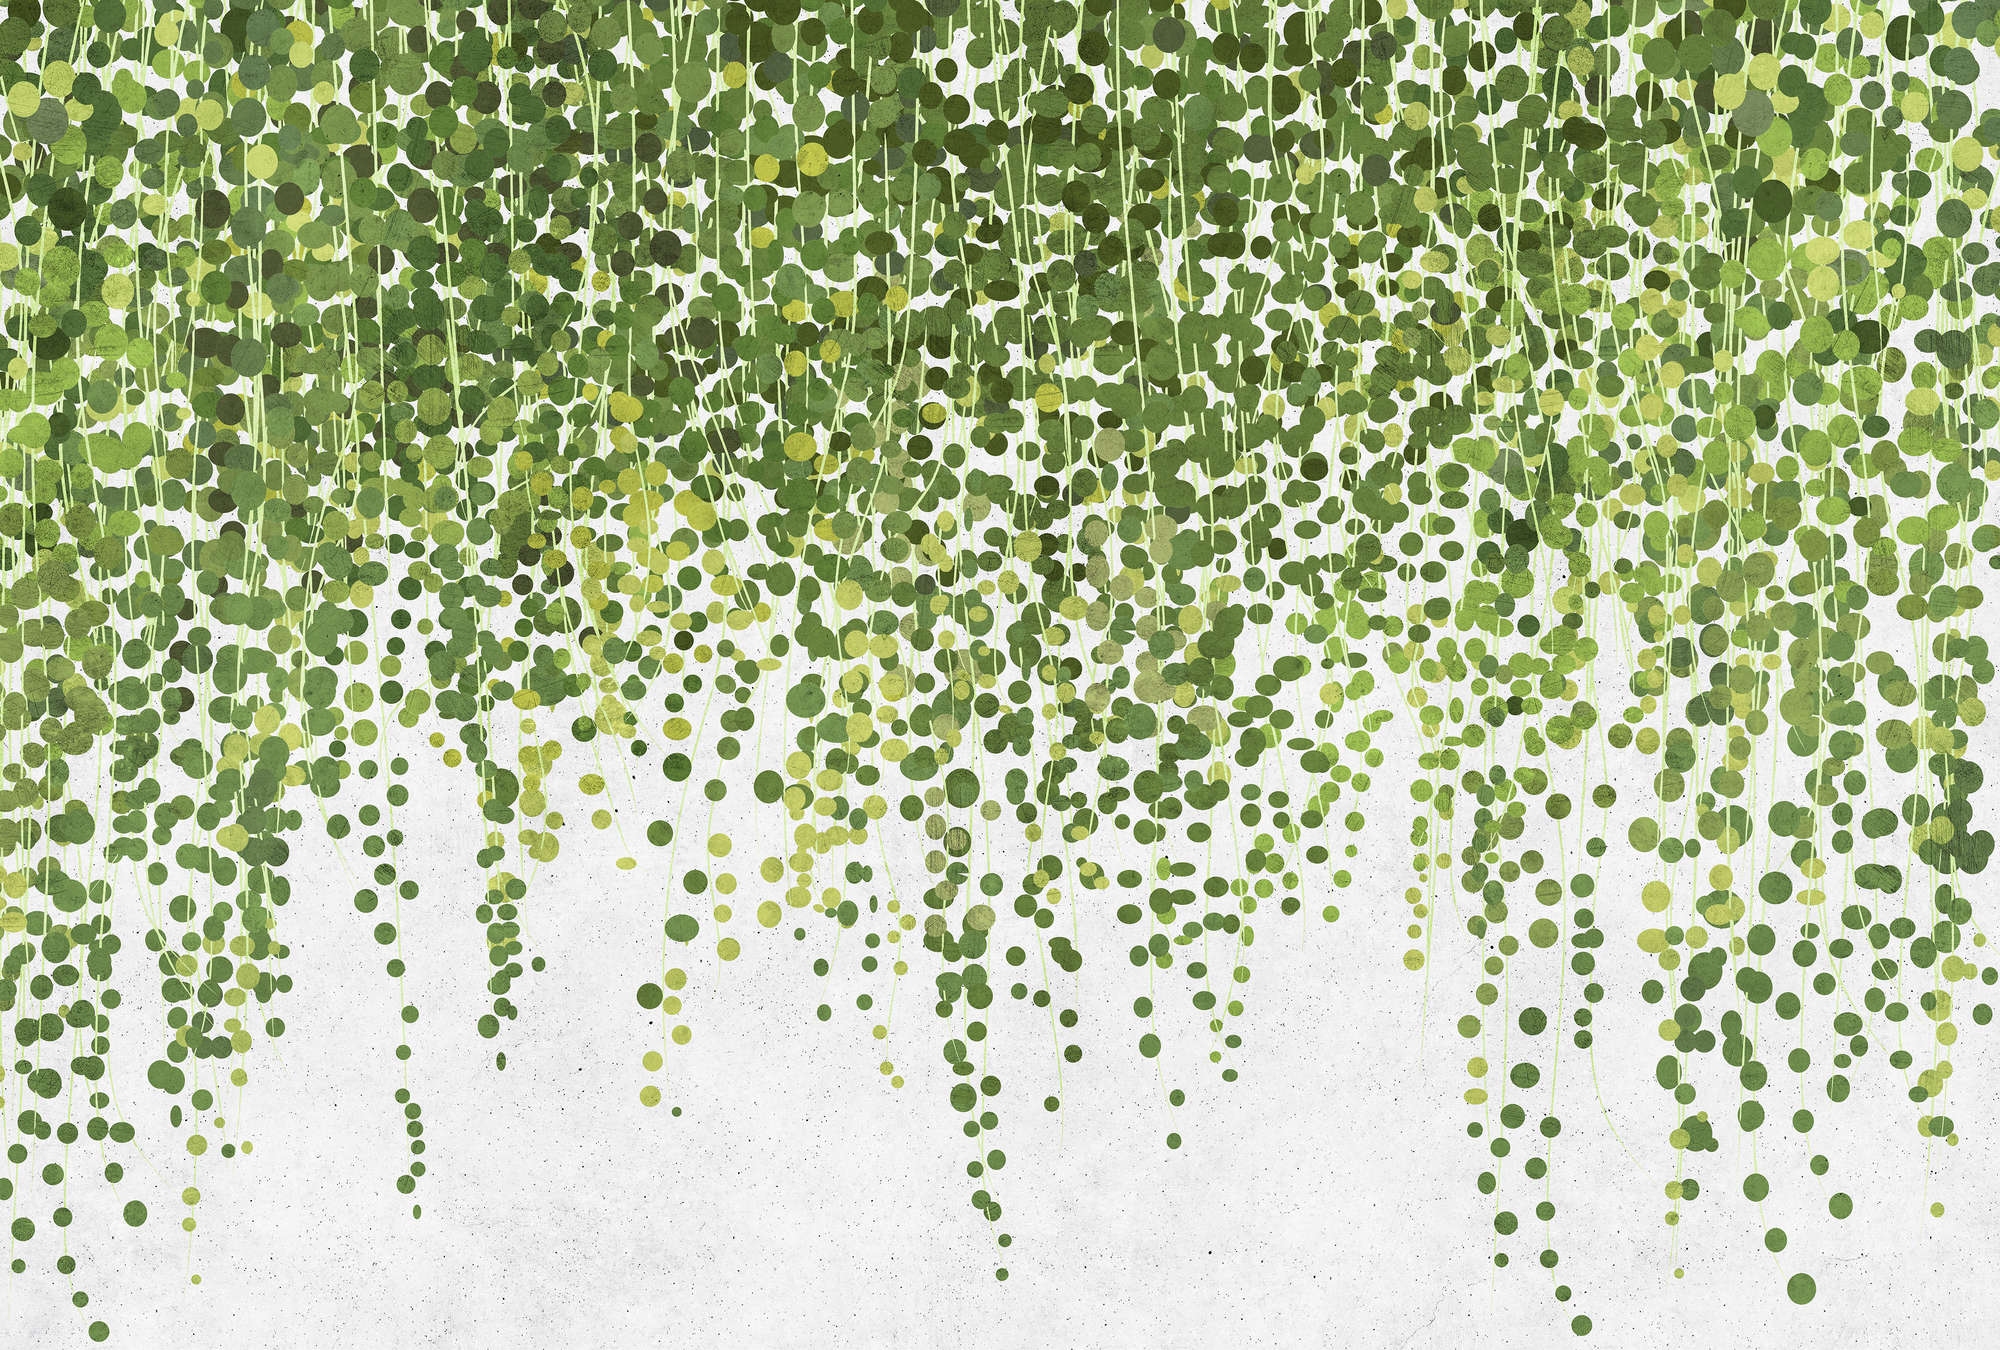             Hanging Garden 1 - Wallpaper Leaves and Tendrils, Hanging Garden in Concrete Structure - Grey, Green | Pearl Smooth Nonwoven
        